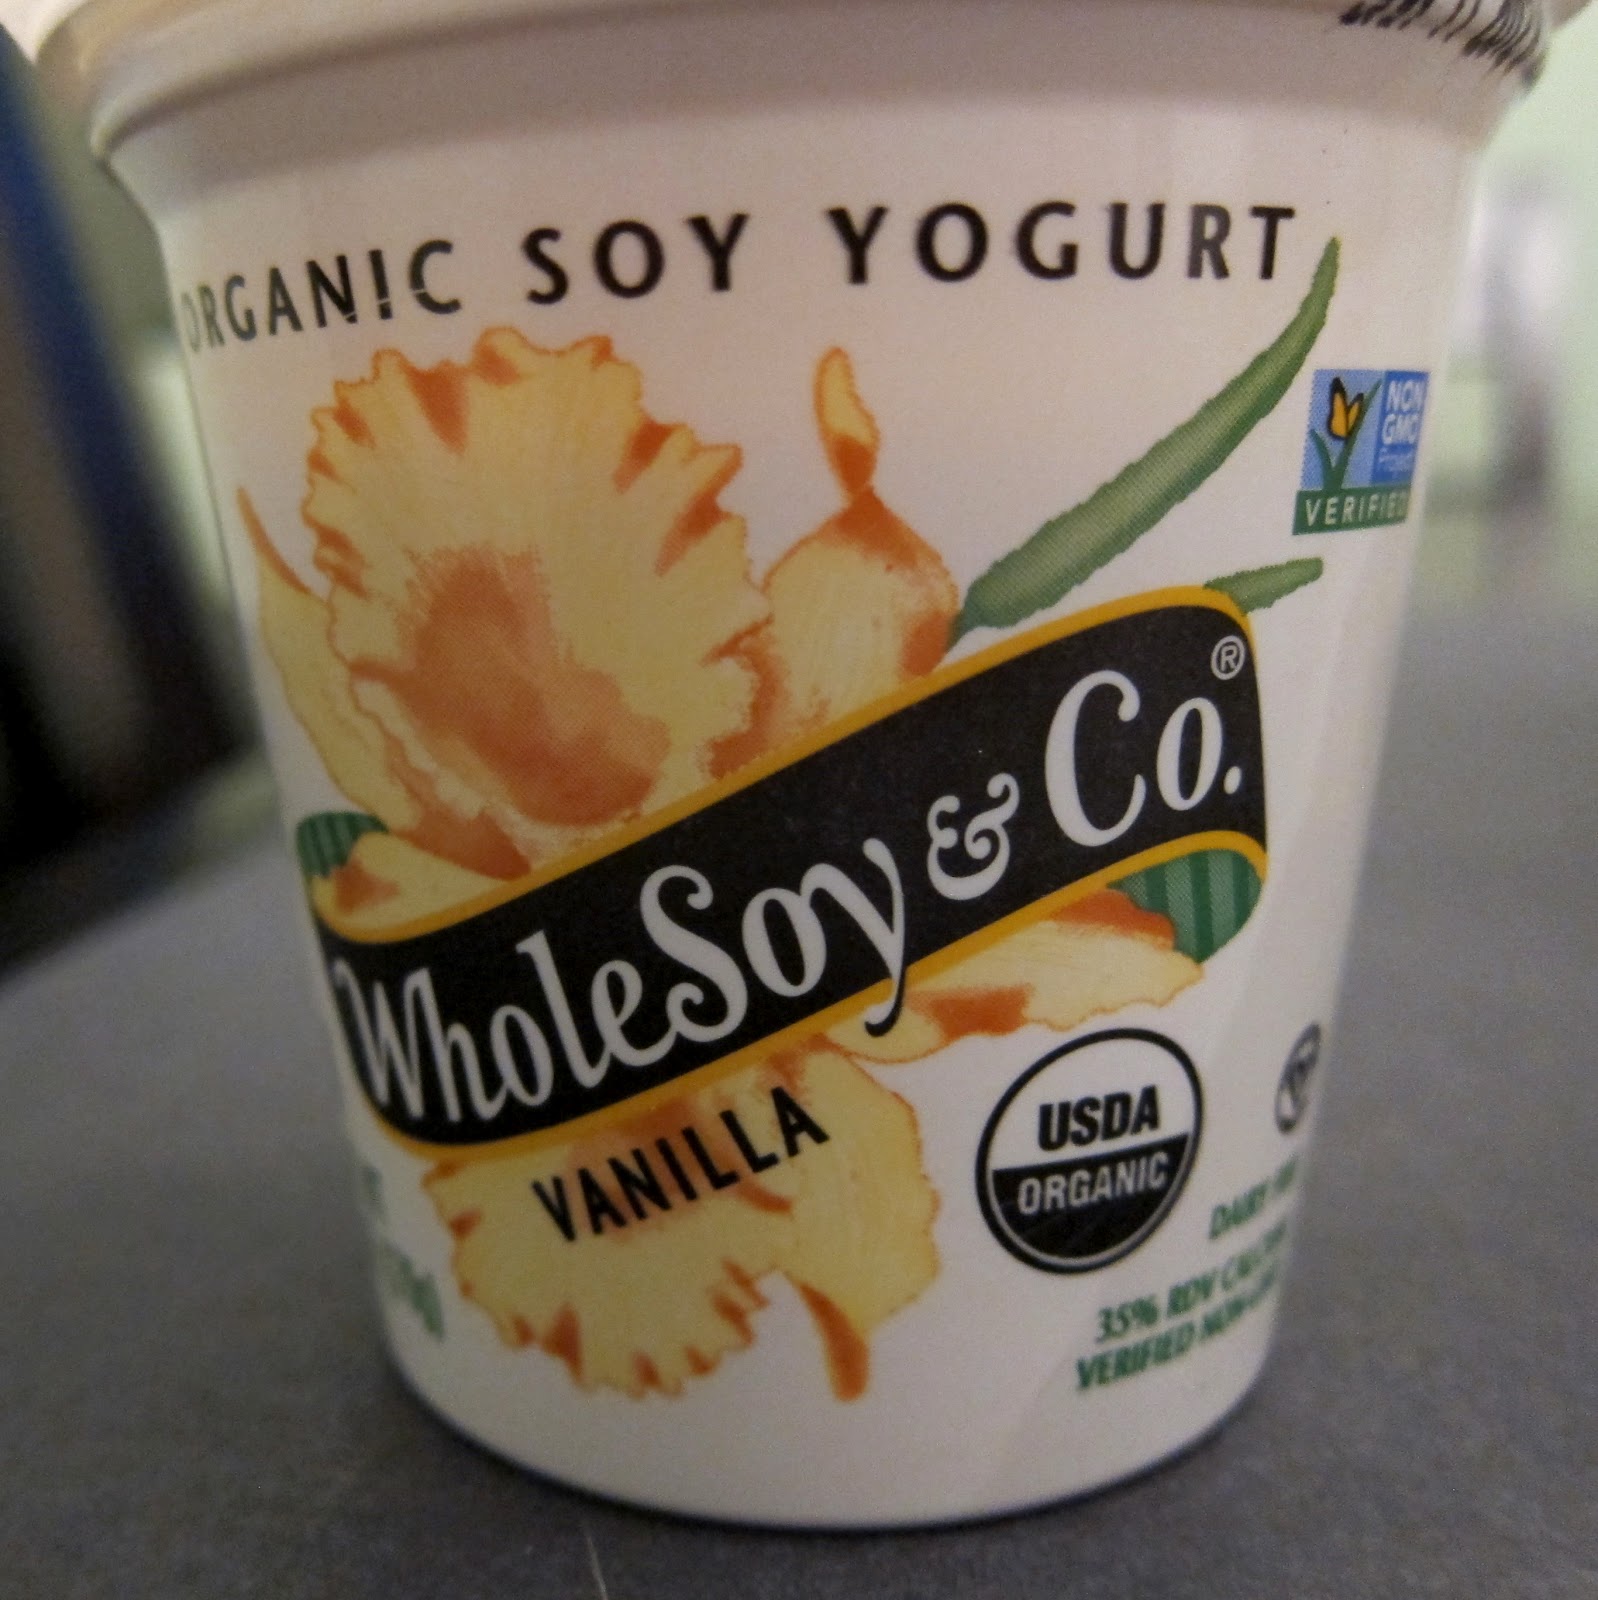 What Can I Substitute For Soy Yogurt